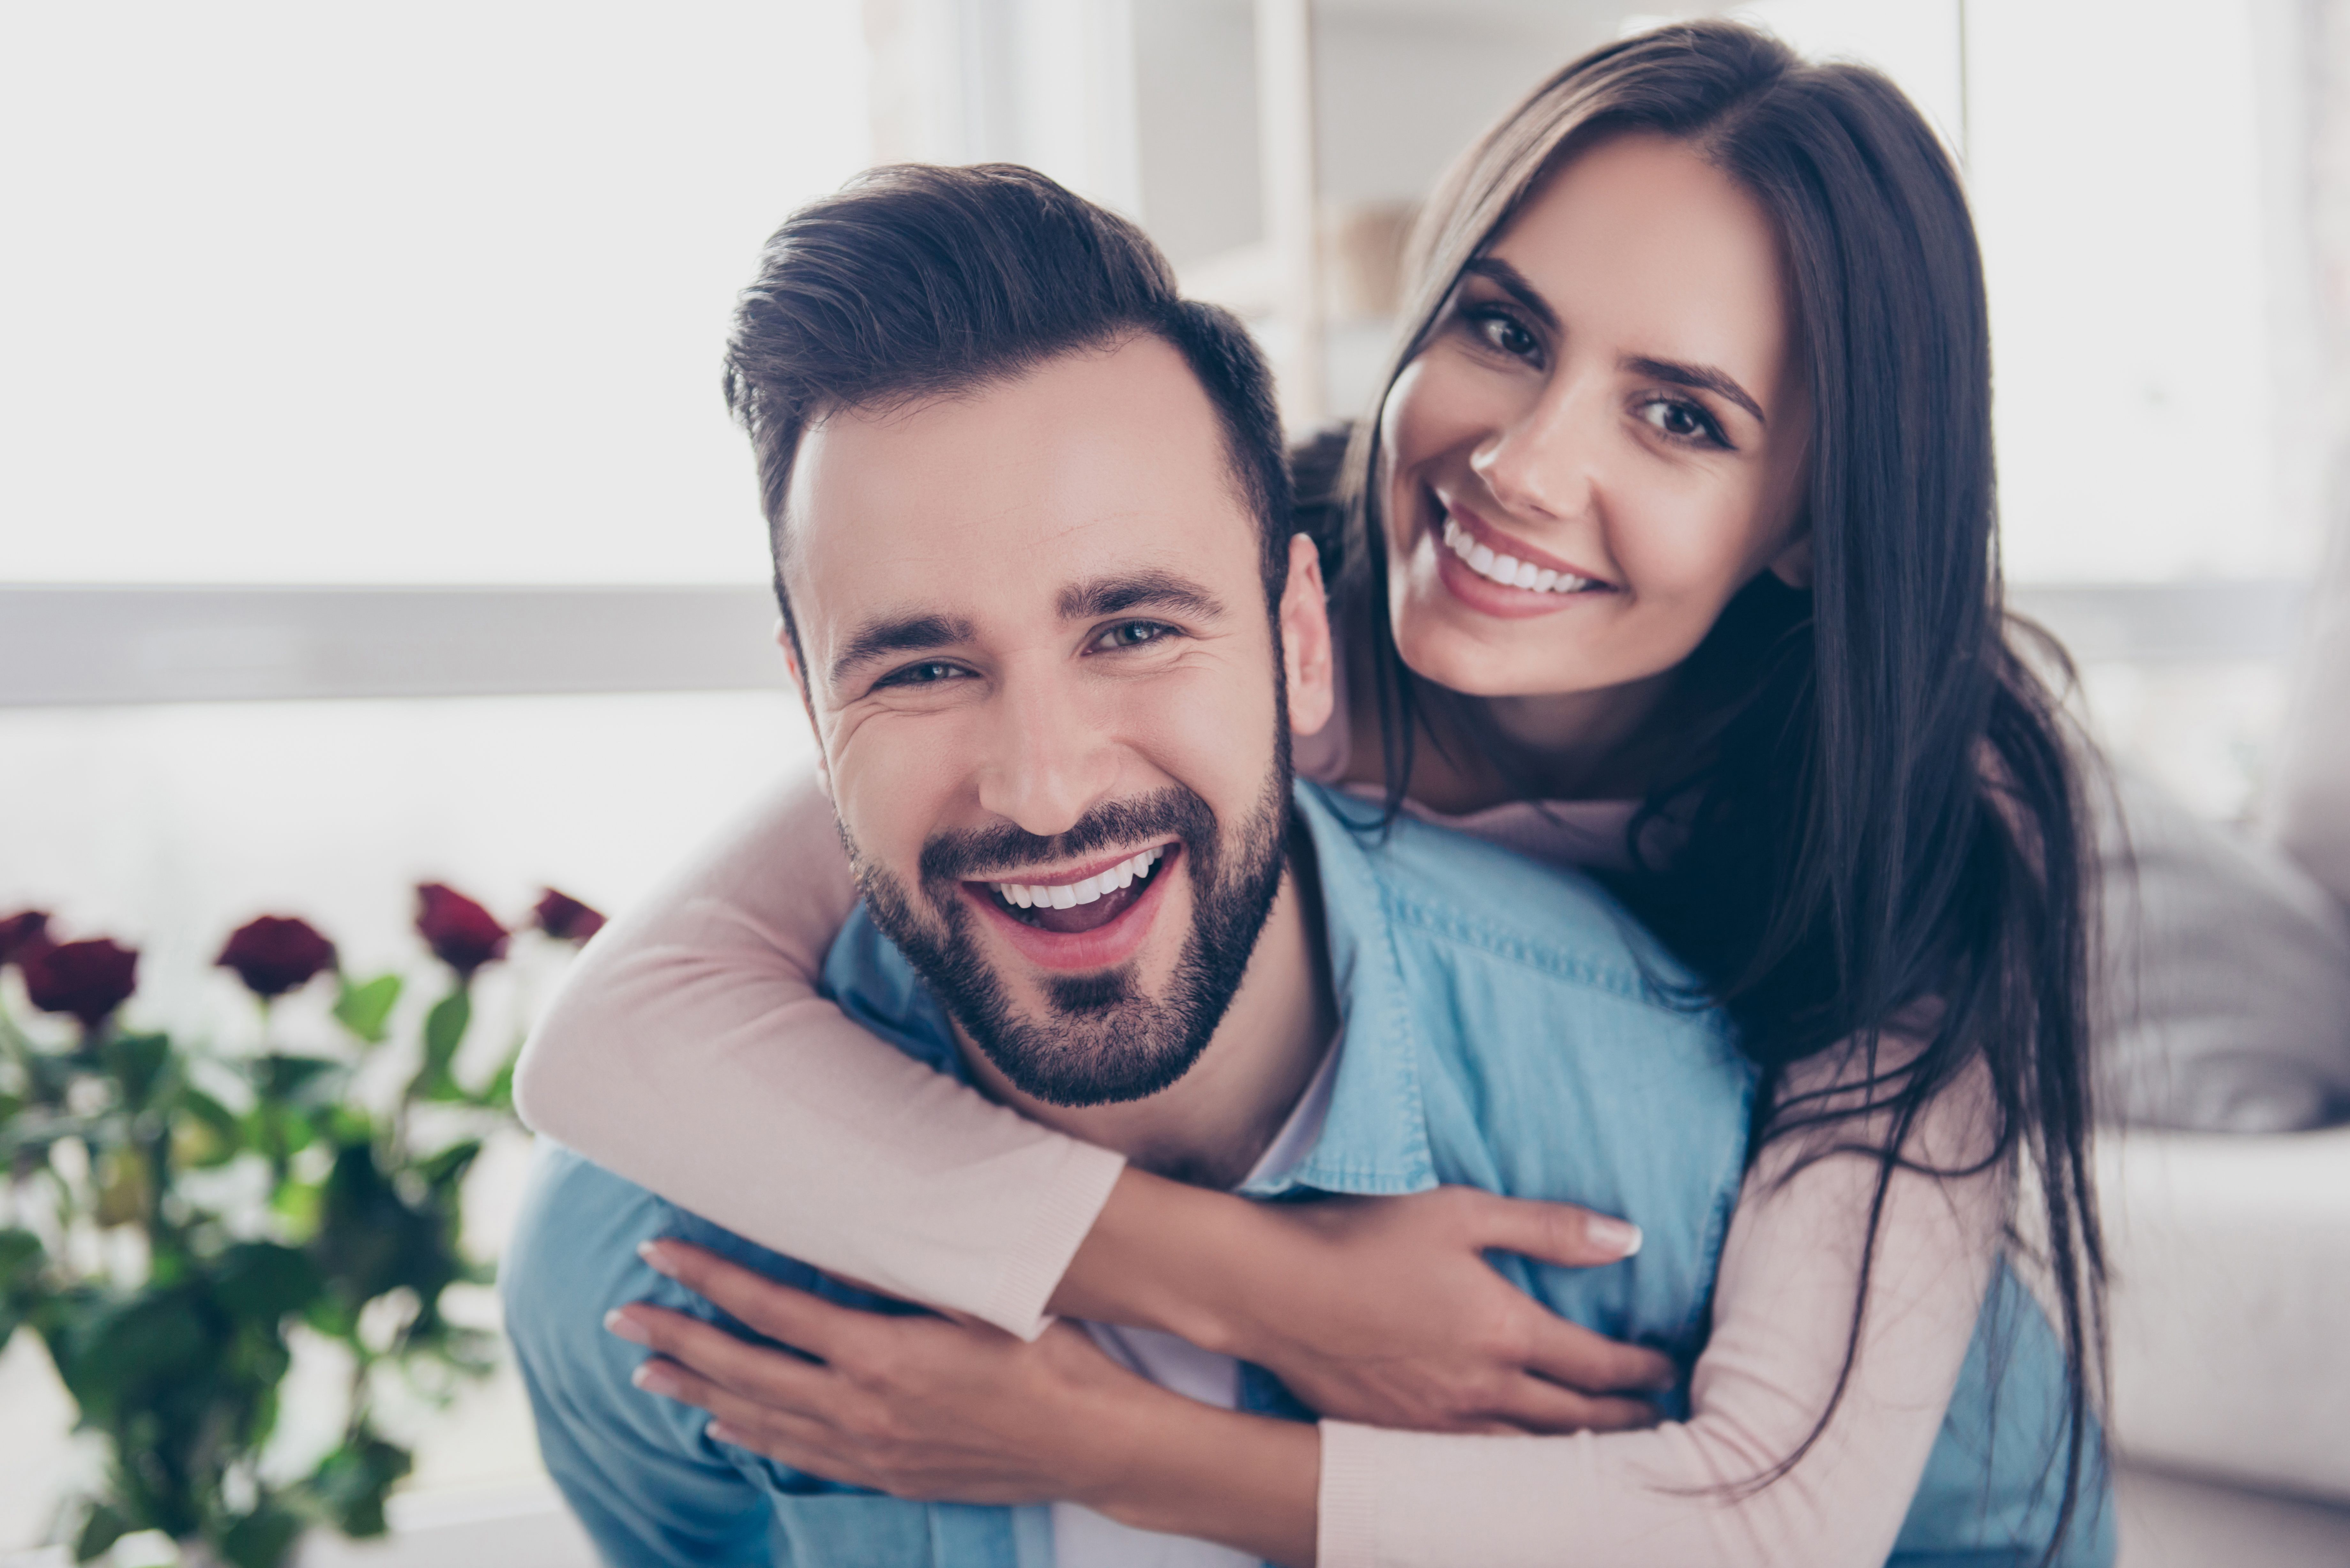 A happy couple smiling | Source: Shutterstock